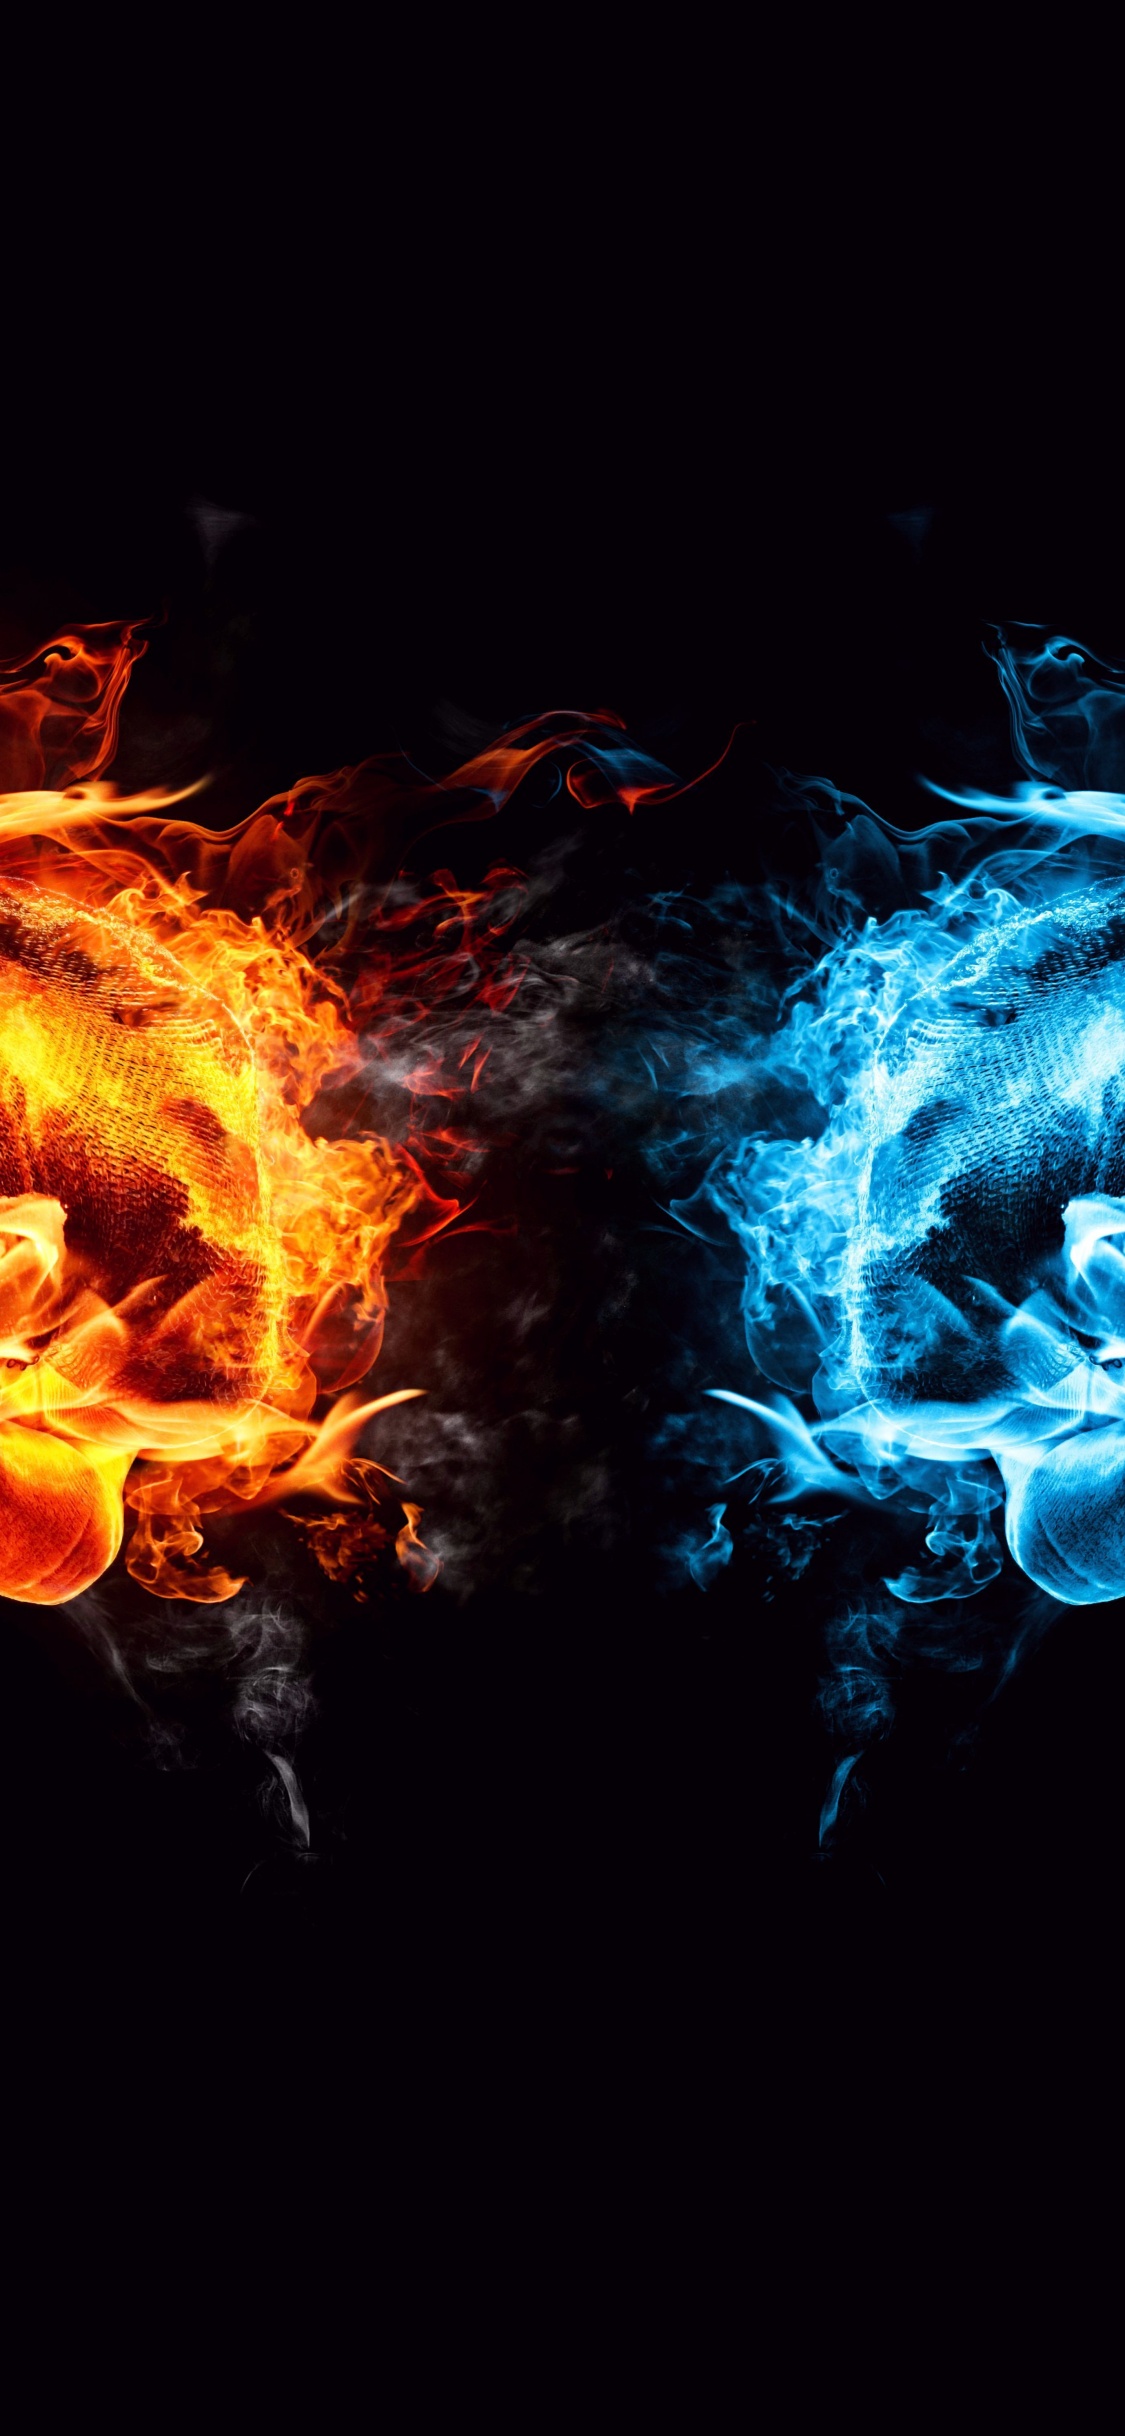 Blue and Orange Flame Illustration. Wallpaper in 1125x2436 Resolution